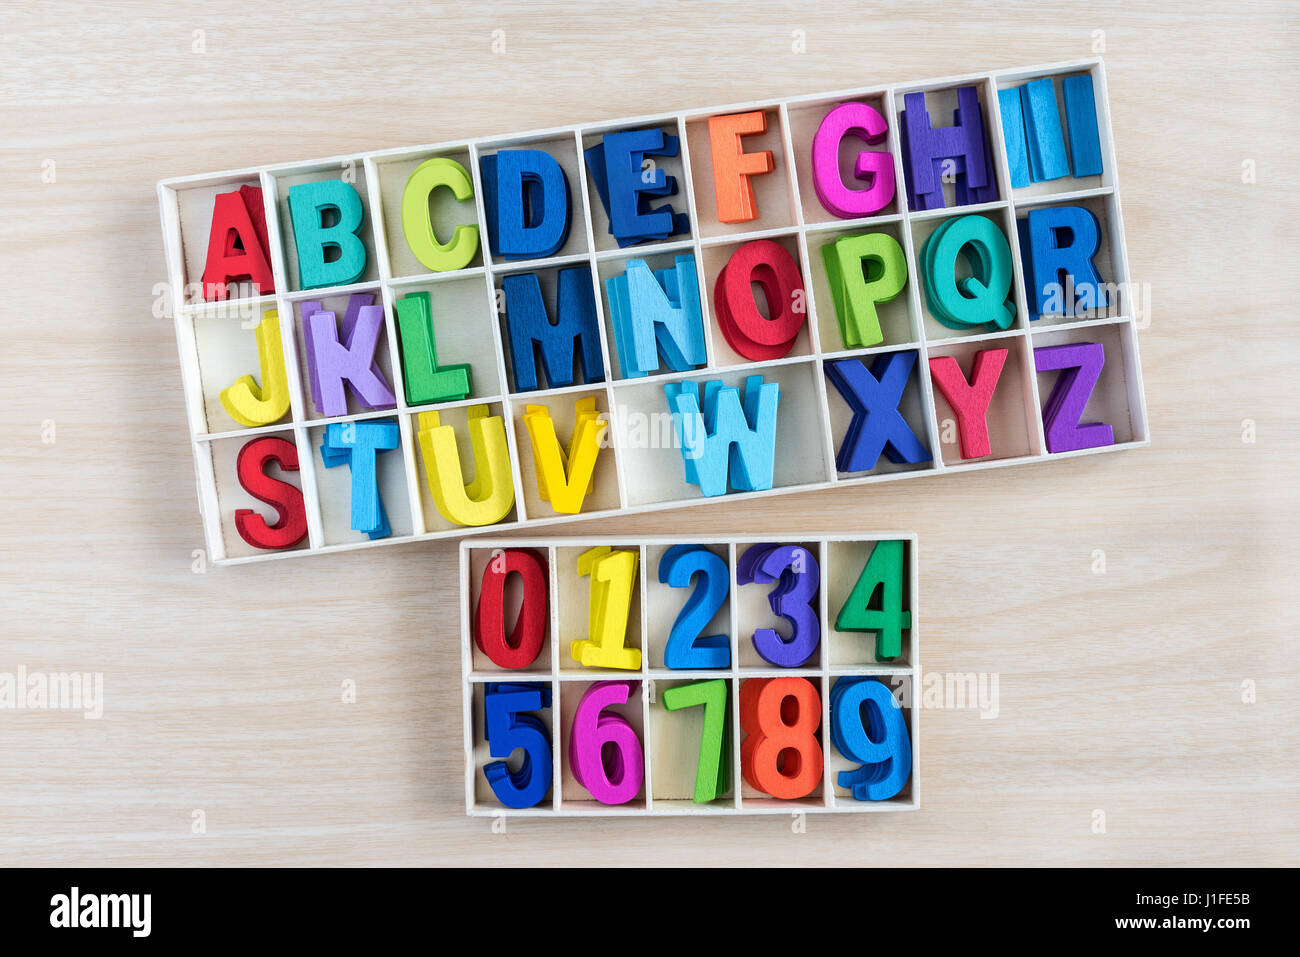 colorful alphabet letters and number in a wooden box with square compartments for teaching kids to read and spell, overhead viewful Stock Photo